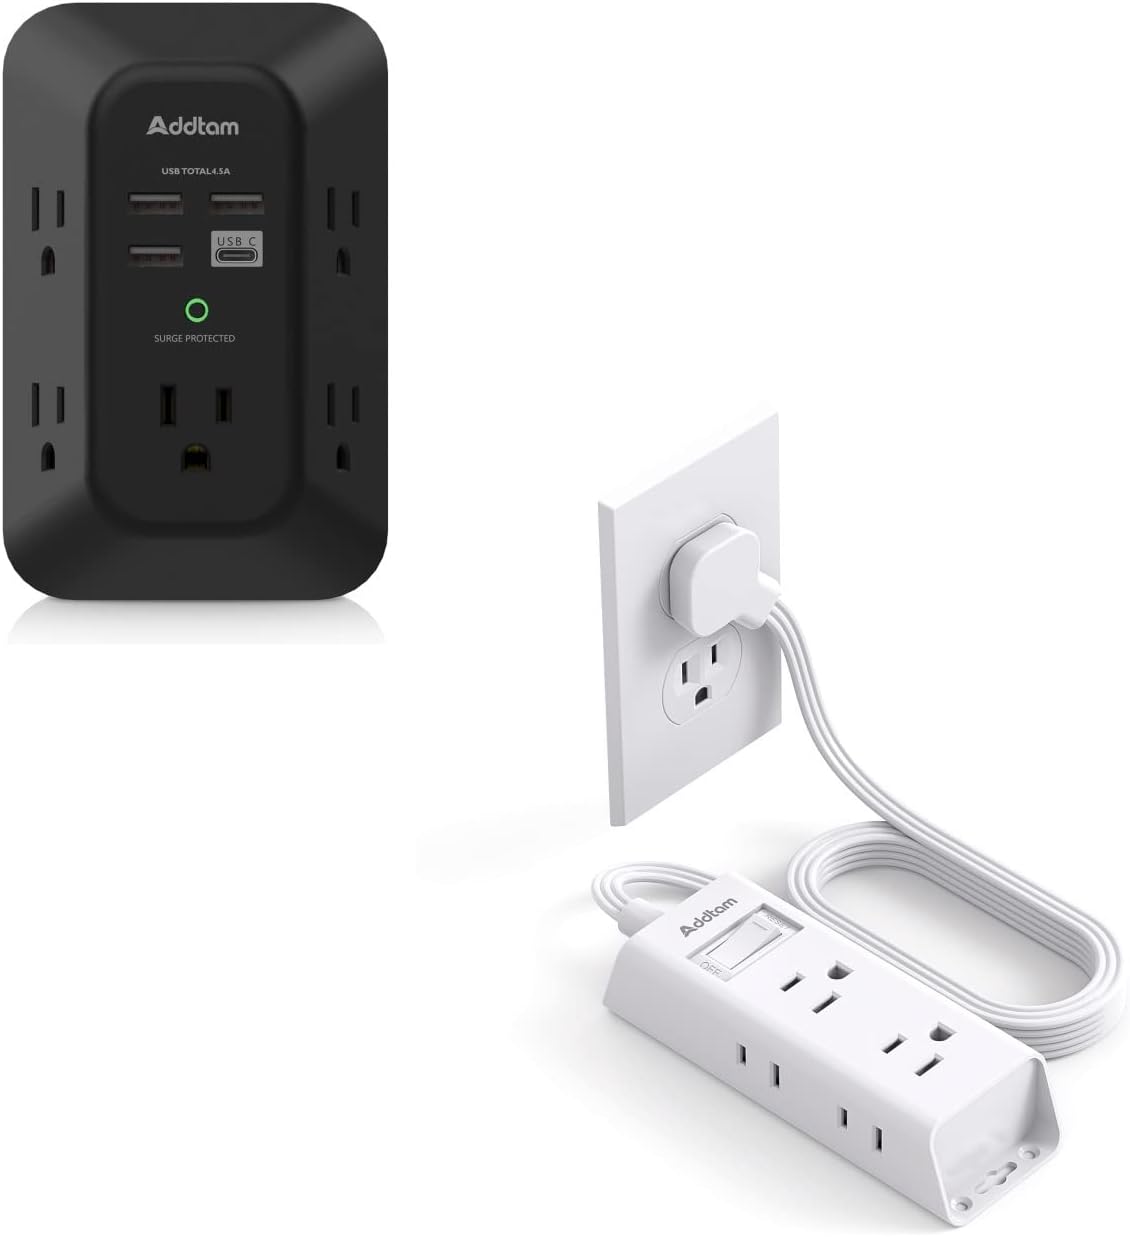 This has a very flat extention cord and flat plug. It fits up snuggly so furniture can be moved in tight. The plug itself creates a sleek outlet connection and the cable can run behind or under furniture without risk of damage. It is very safe in preventing cable damage. The diversity of plug options is amazing and having the extra USB C and USB outlet on the plug itself is extra convenient. The plug also can act as an outlet cover for the second outlet. This is great safty for kids without the Hassel of outlet covers that need to be removed individually and awkwardly. This is an all in one solution that works in most situations. I have one in my small apartment behind a bookshelf. I have a USBC charger cable plugged directly into the outlet to charge a mini vacuum on one side of the shelf by the closet. I have a gaming chair on the other side and ran the extension cord part out to plug it in. This conveniently leaves me with extra outlet and USB plugs on that side for my headset, phone and other devices while I game. It is very subtle and does not stand out in my small living room. I also gave one to my brother for his house since he has a daughter who is approaching the age of two. This cable works great for both our different living situations!